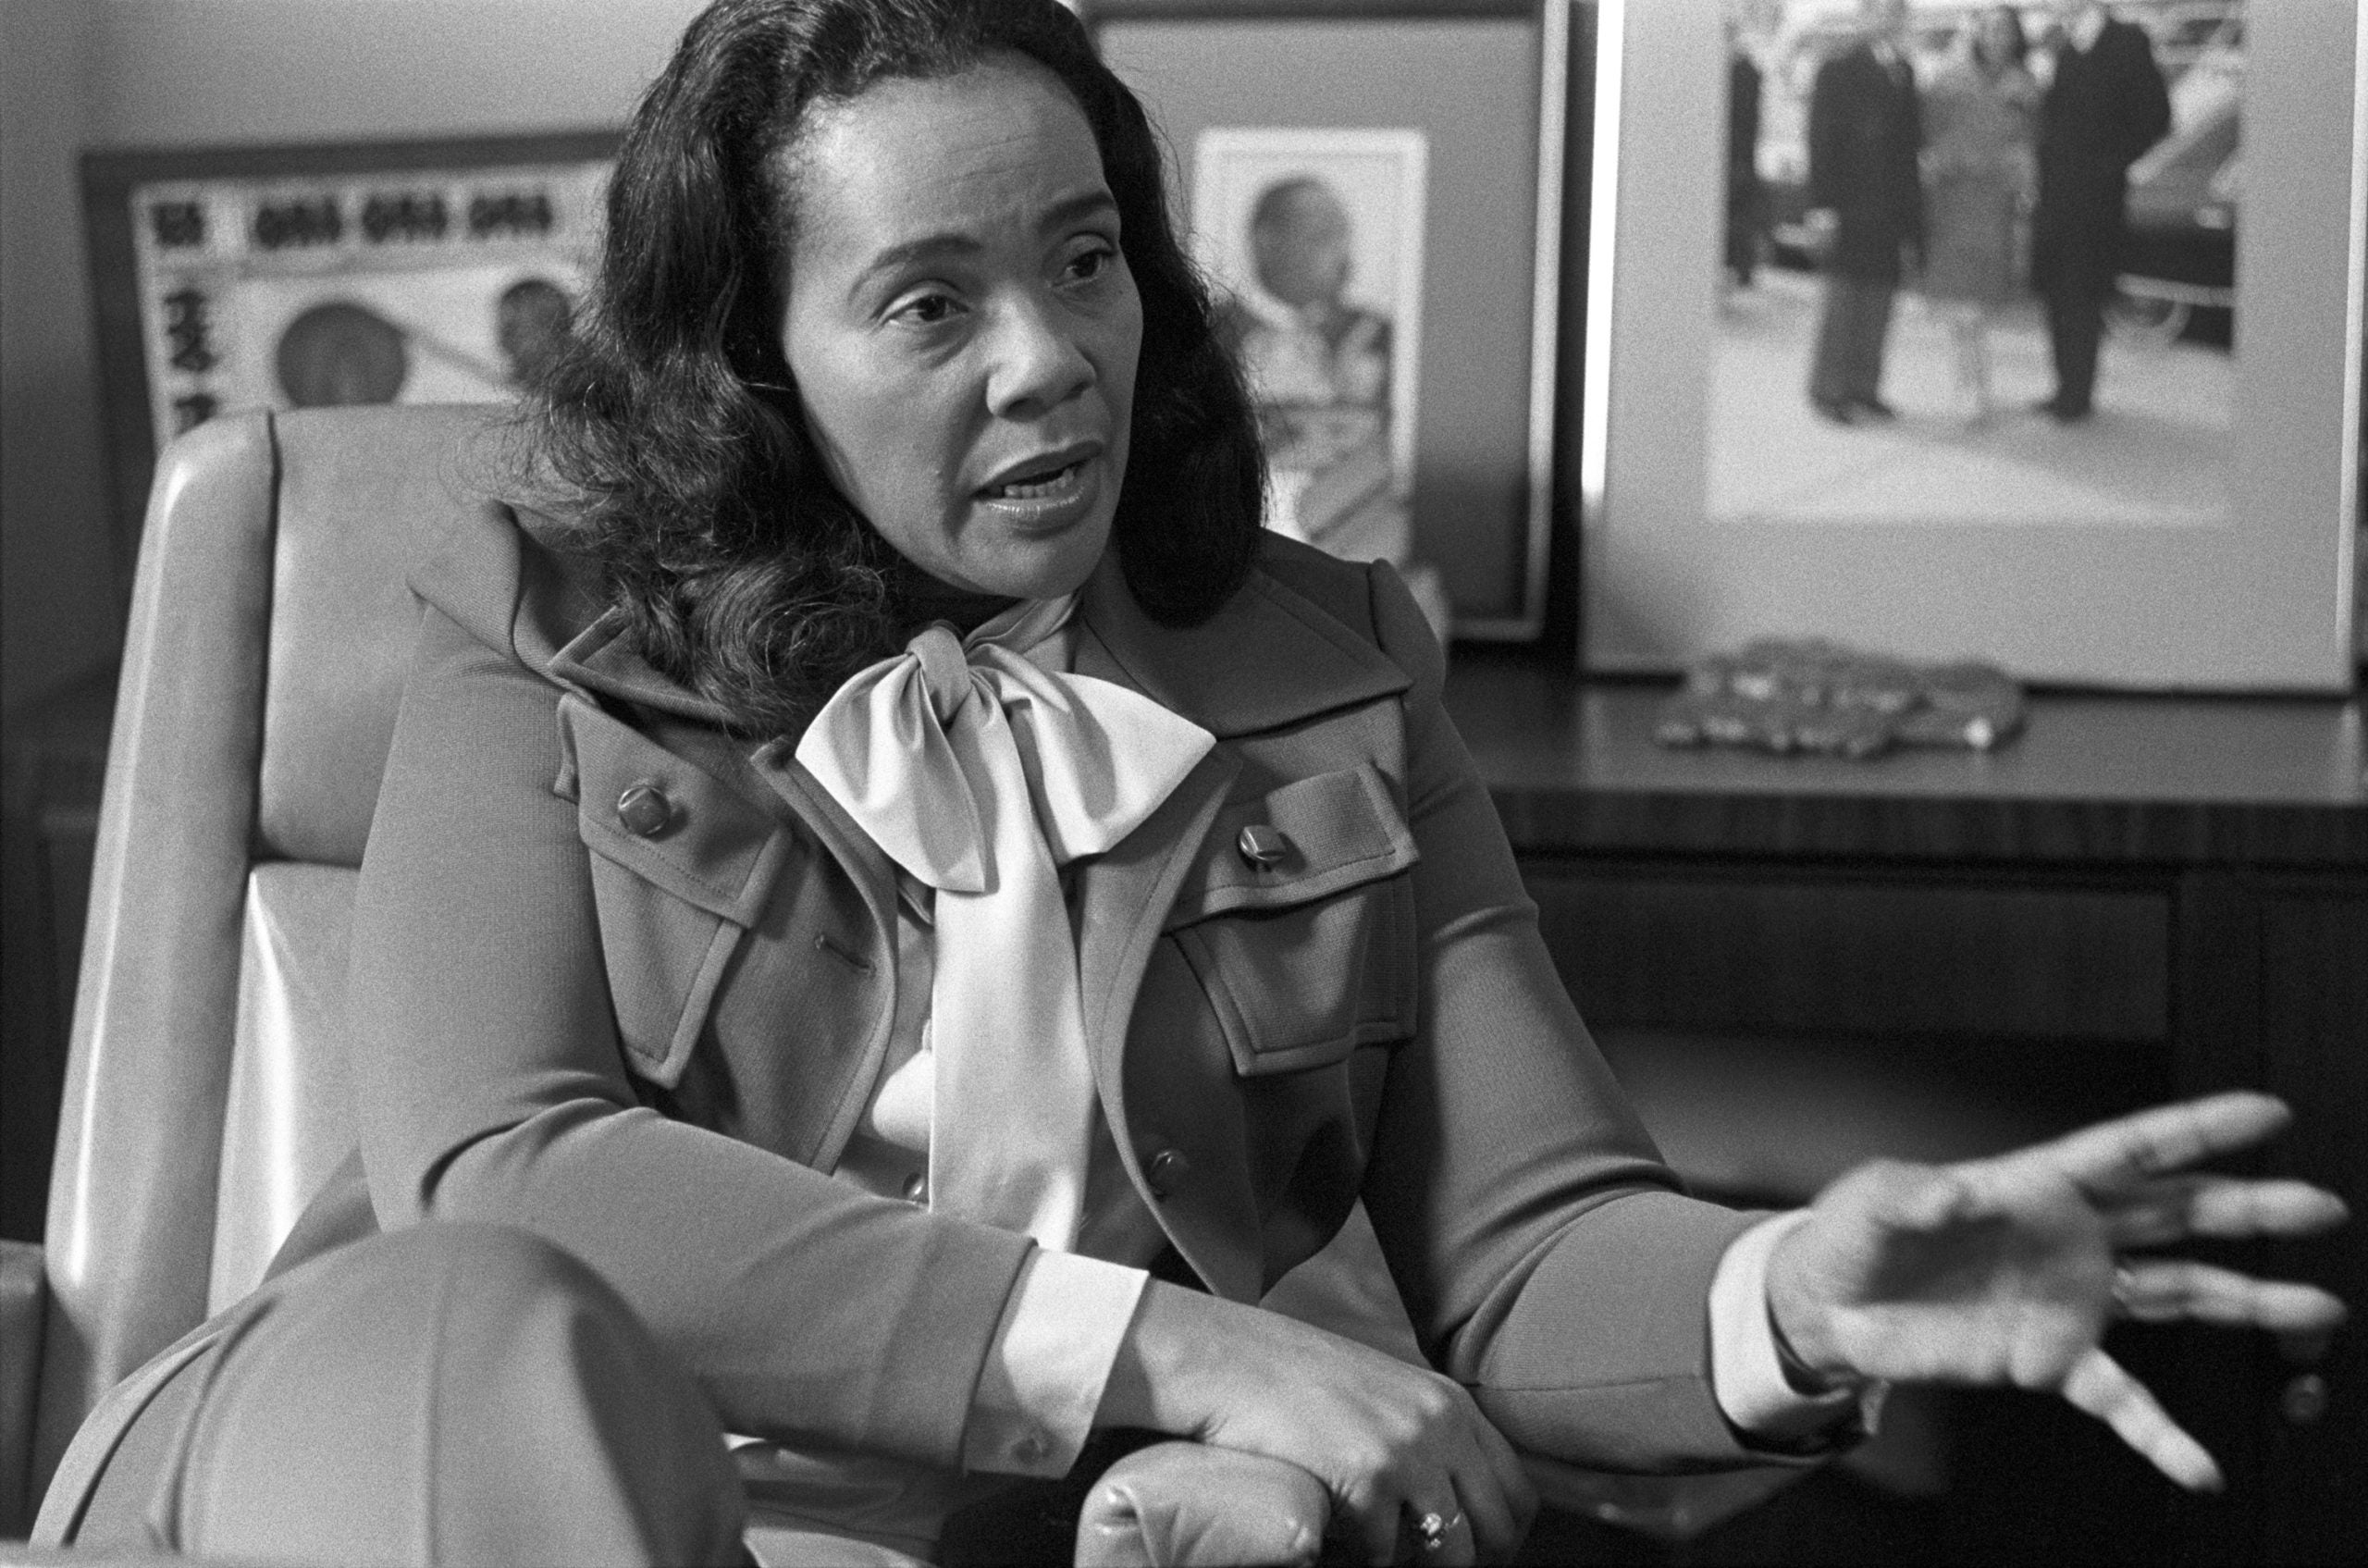 Remembering Coretta Scott King: The Impact Of The Author, Activist And Civil Rights Leader